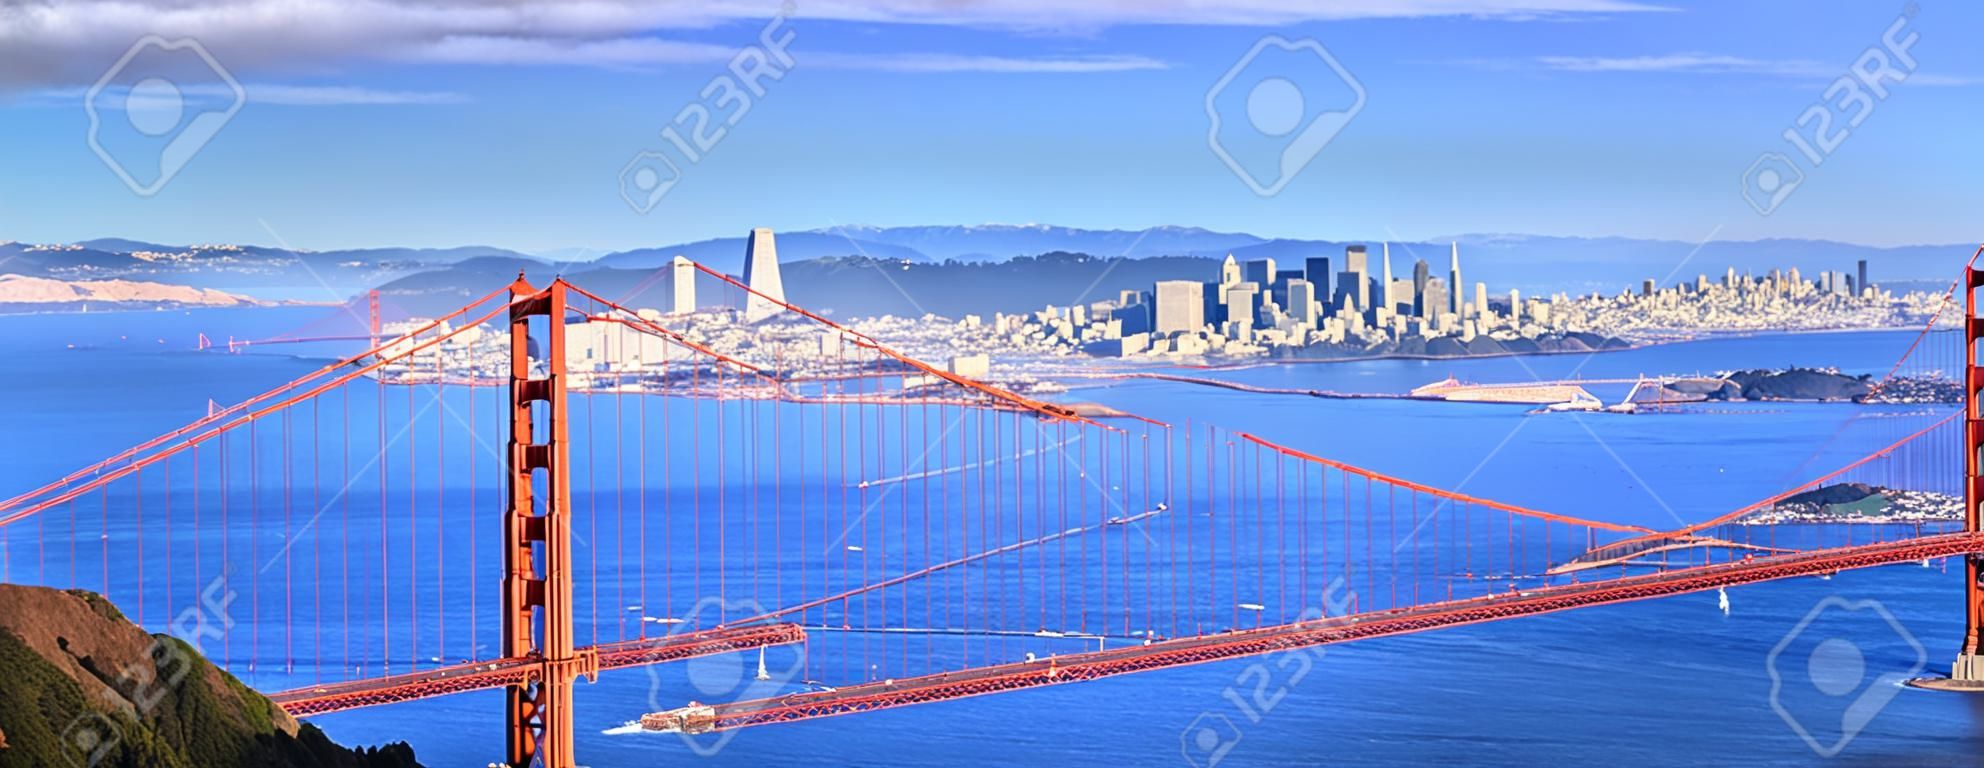 Panoramic view of famous Golden Gate Bridge and downtown San Francisco 